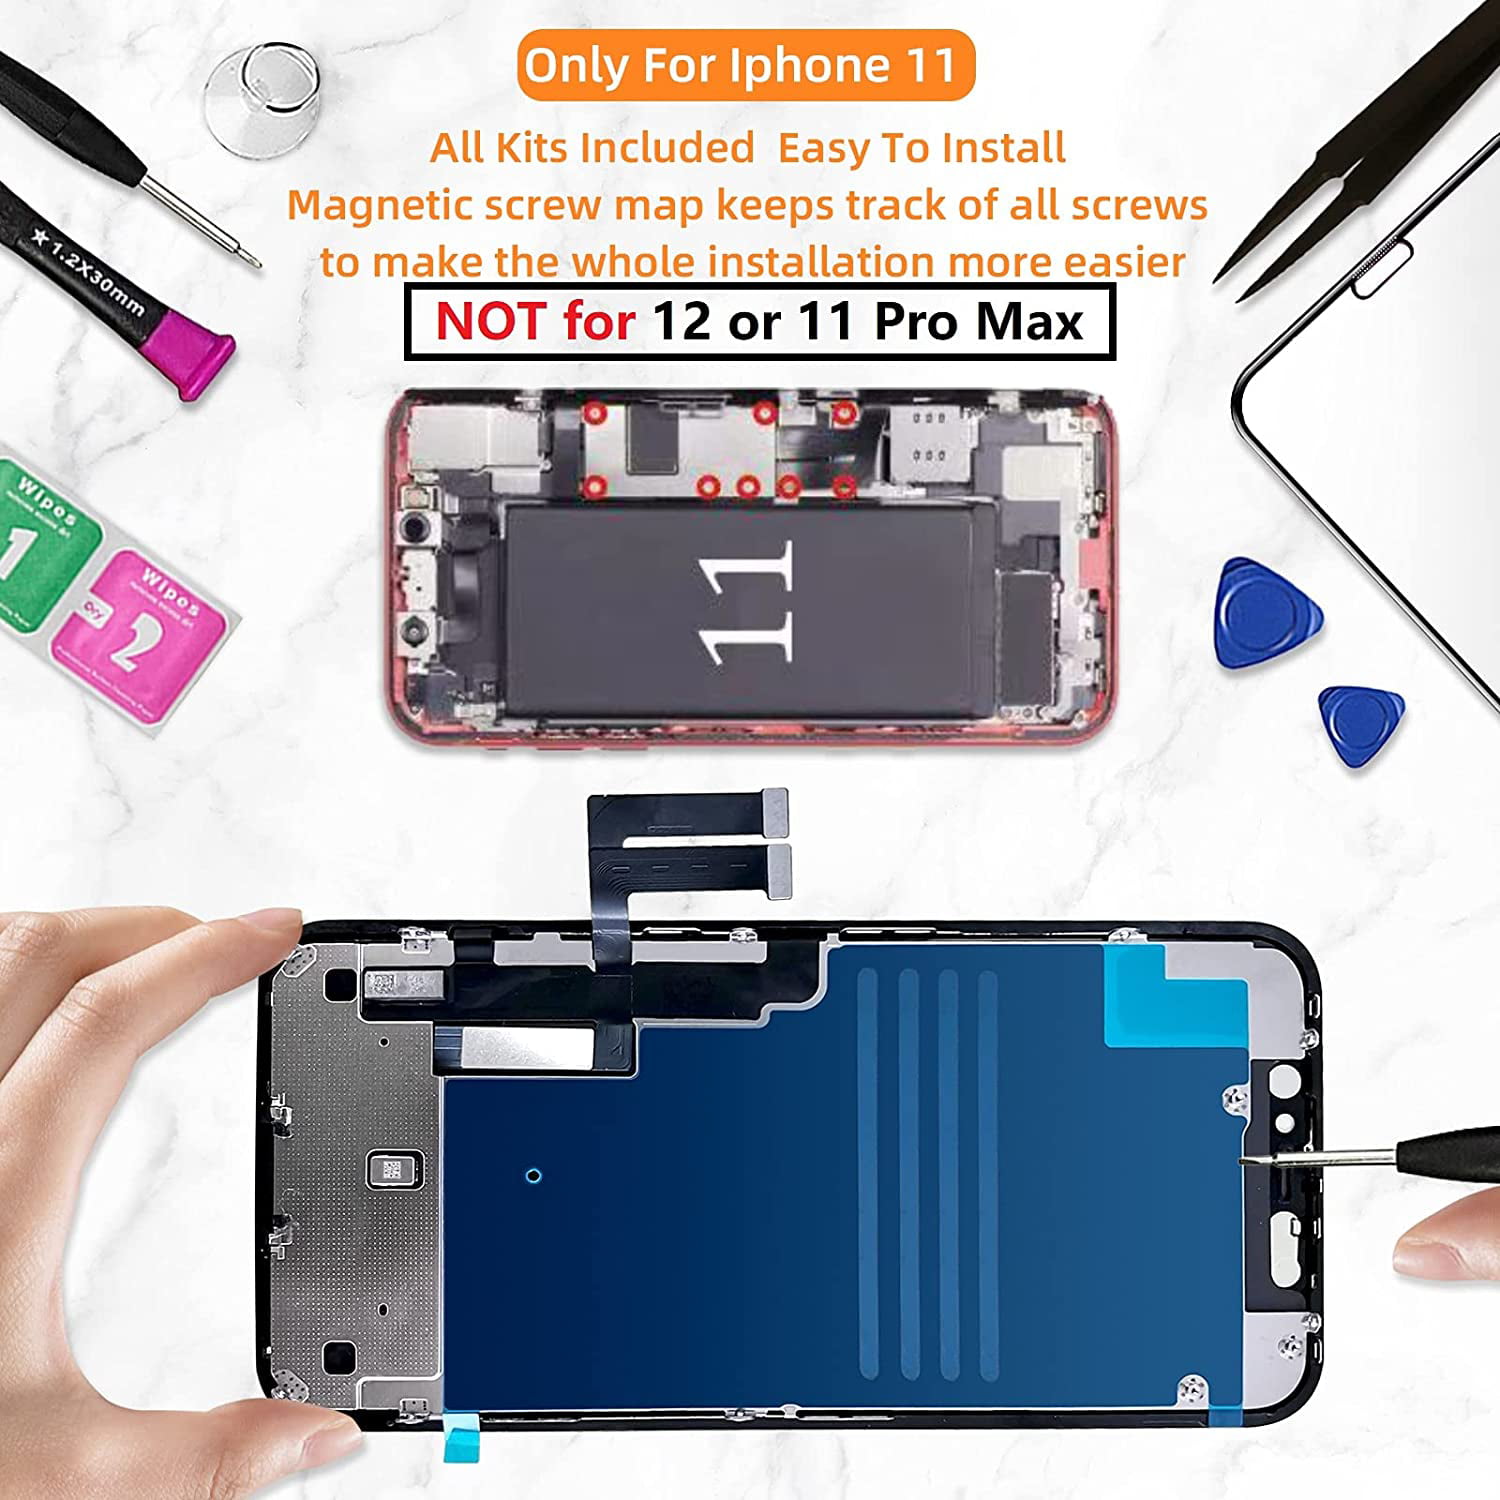 3D Touch Screen LCD Display Digitizer for A2111 for iPhone 11 Screen Replacement 6.1” Waterproof Frame Adhesive Sticker 6.1 Screen Tempered Protector A2221 with Repair Tools Kit A2223 